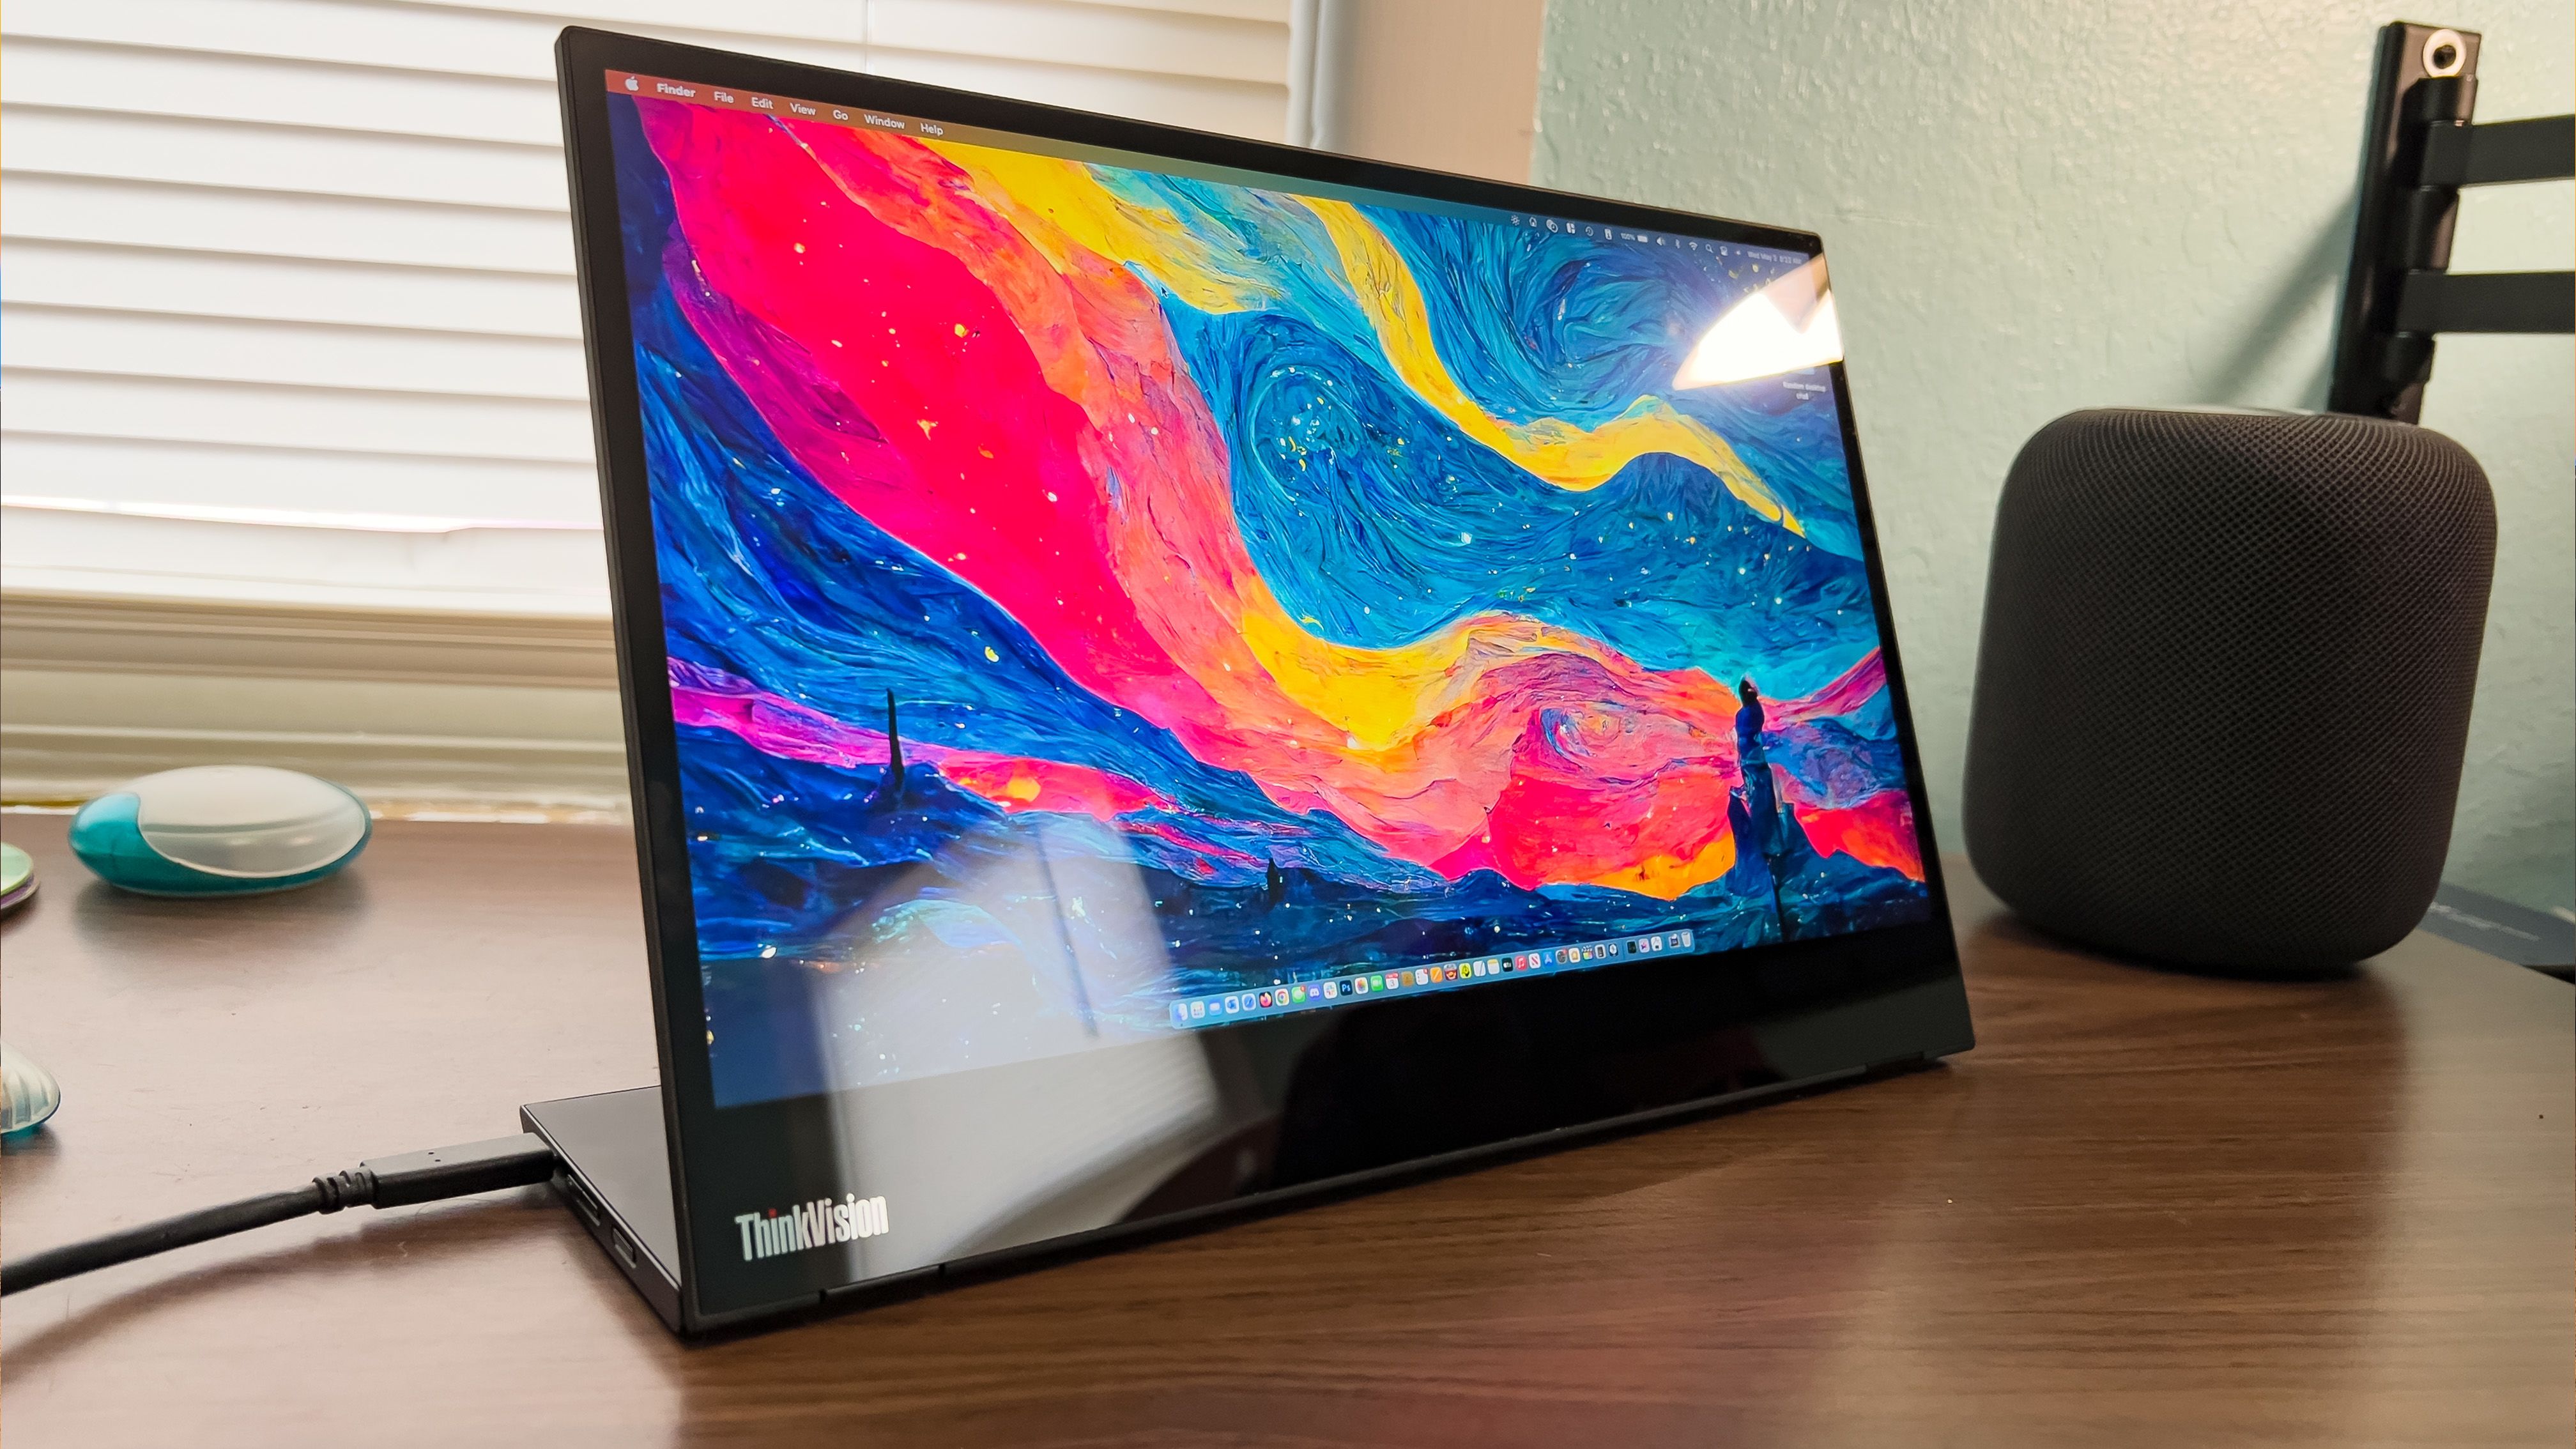 The 4 Best Portable Monitors - Winter 2024: Reviews 